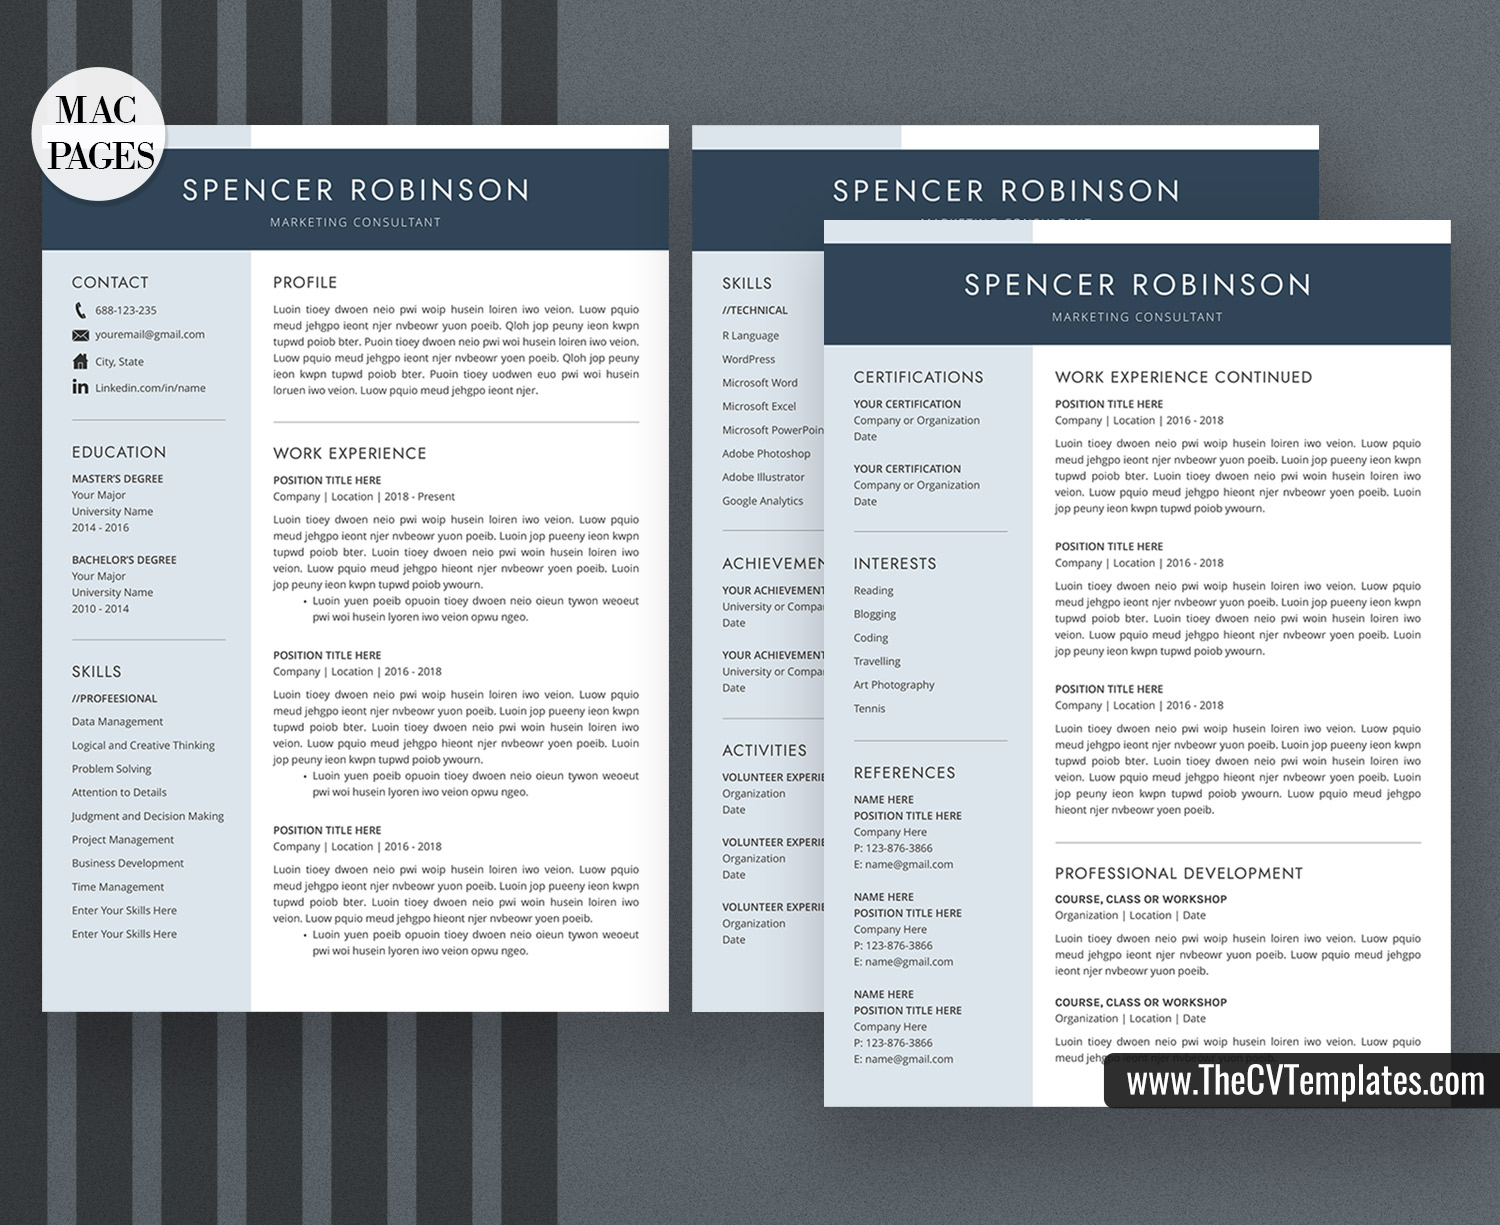 For Mac Pages Professional Resume Template Modern Resume Design Simple Resume Format Editable Resume Clean Resume 1 Page 2 Page 3 Page Resume Simple Resume For Apple Pages Instant Download Thecvtemplates Com